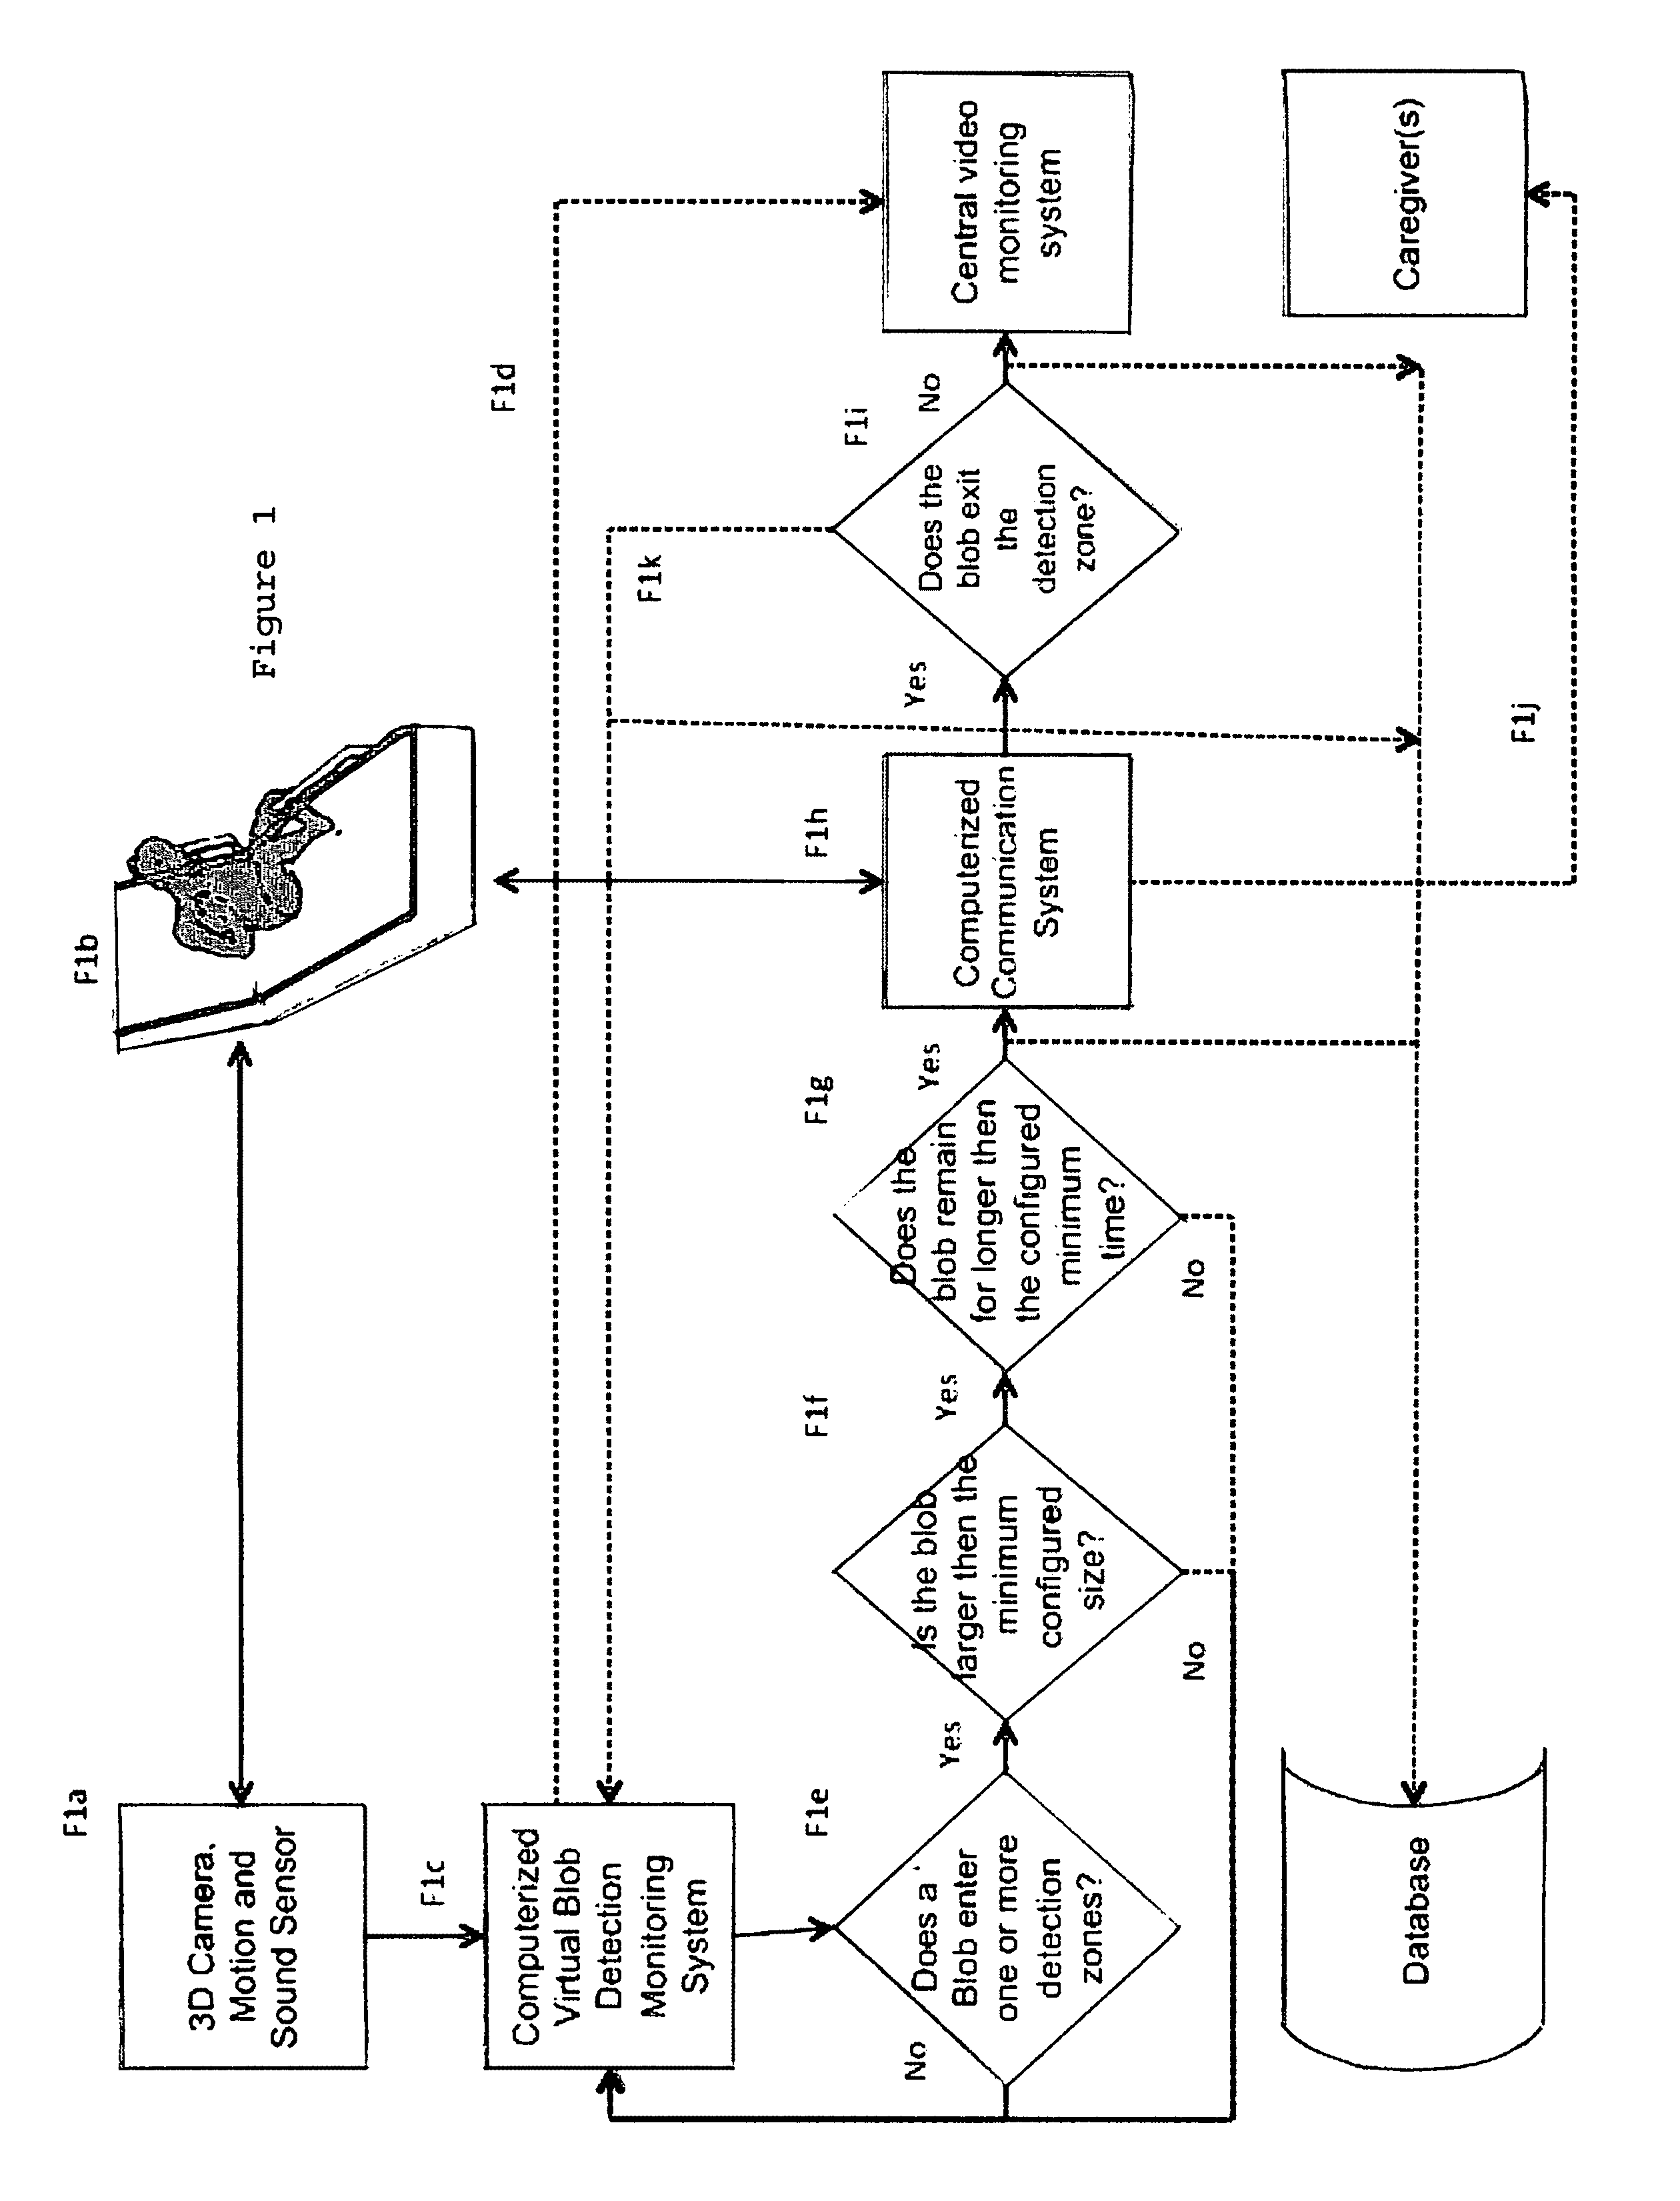 System for determining whether an individual enters a prescribed virtual zone using 3D blob detection